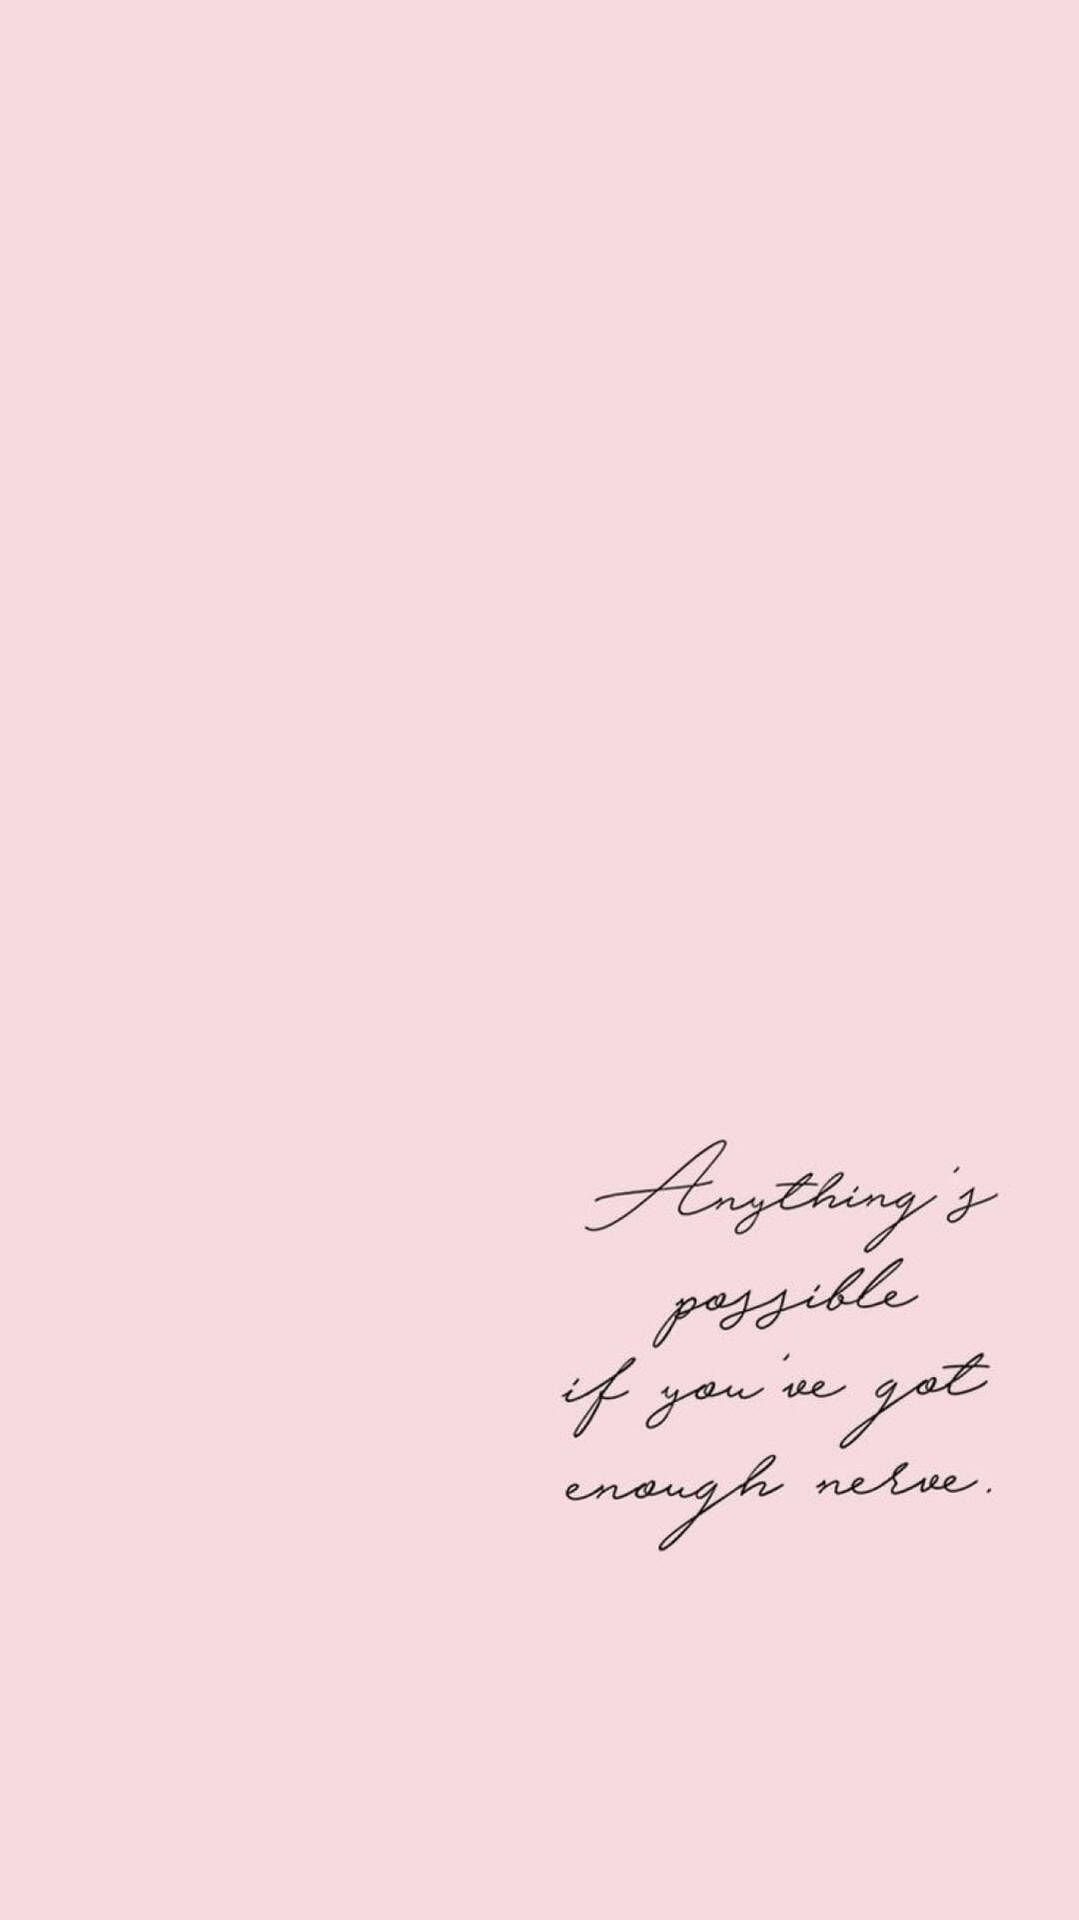 Anything's possible if you've got enough nerve. quote wallpaper, phone background, pink background - Quotes